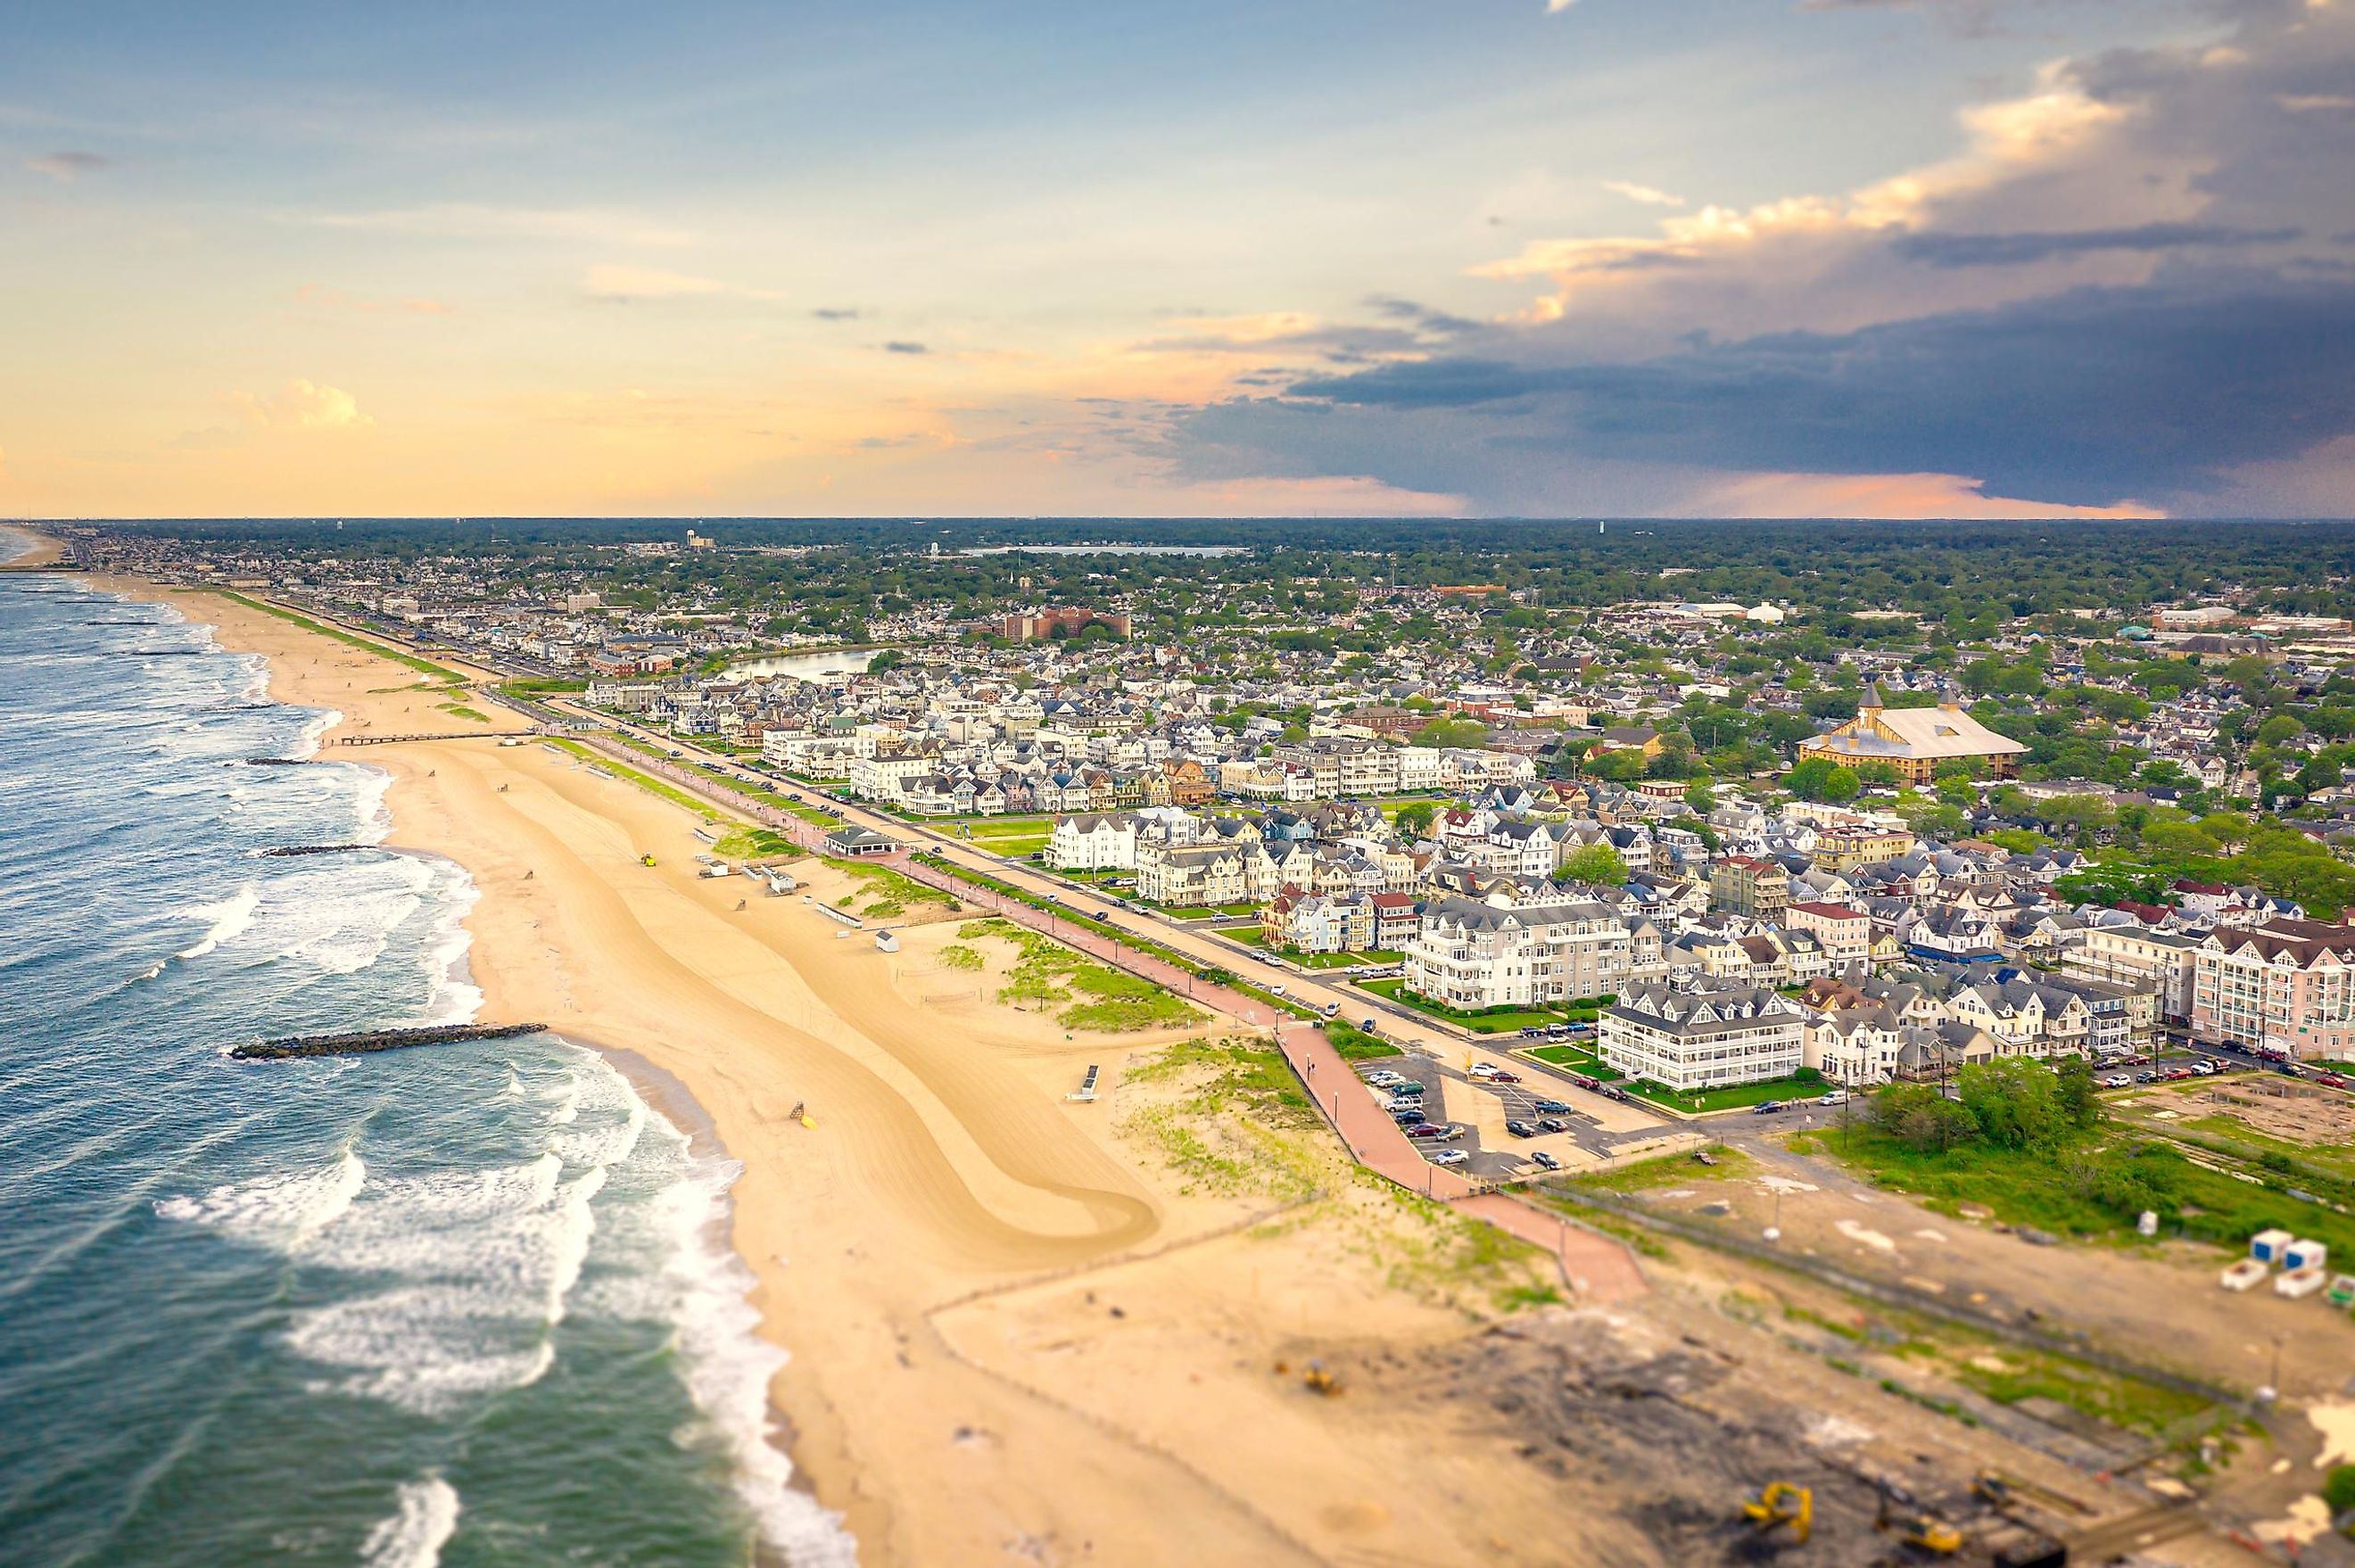 Aerial view of the Asbury Park beach and town.